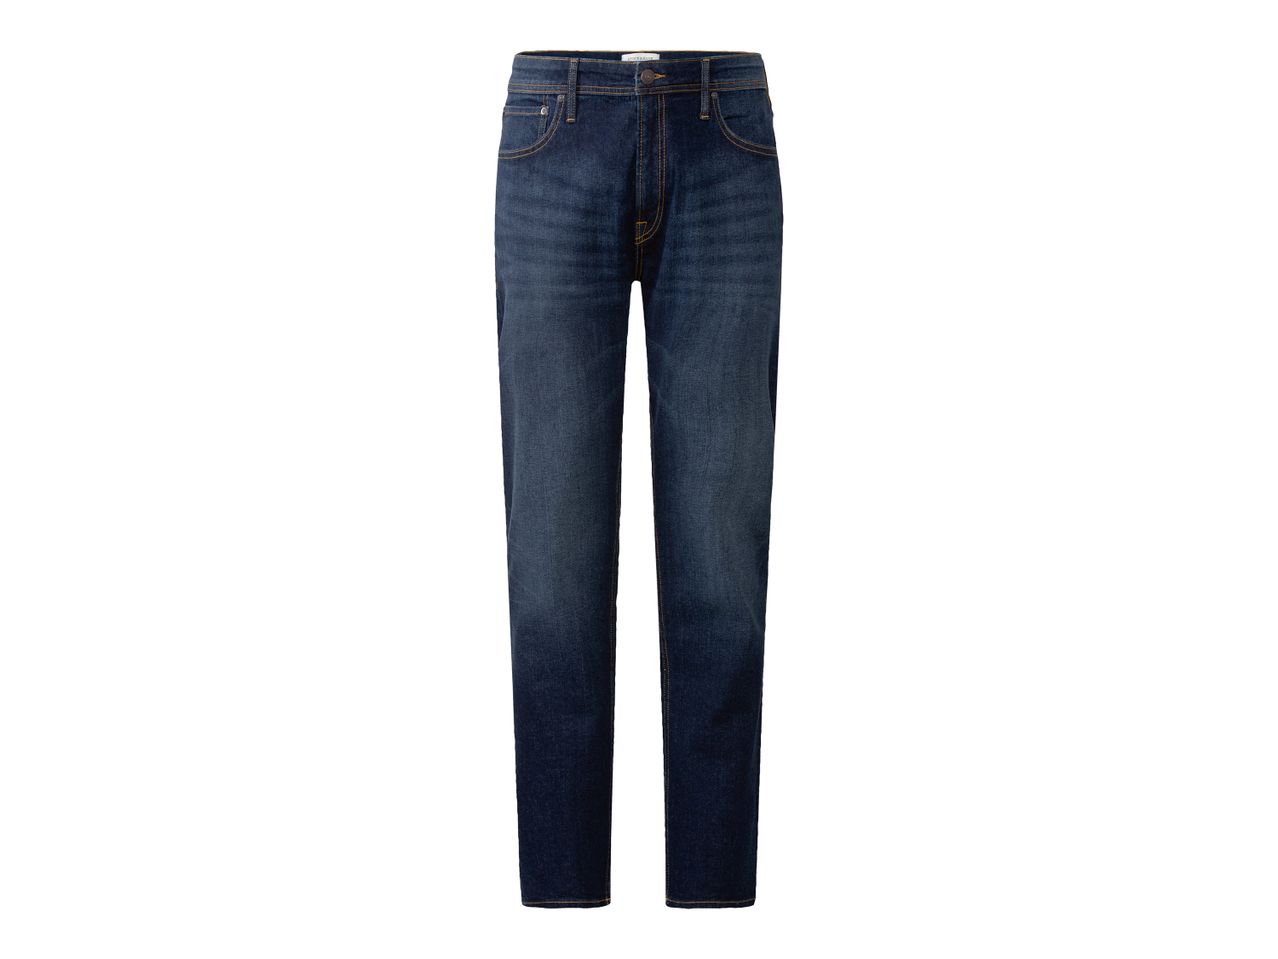 Go to full screen view: Men's Jeans Reg Fit - Image 2